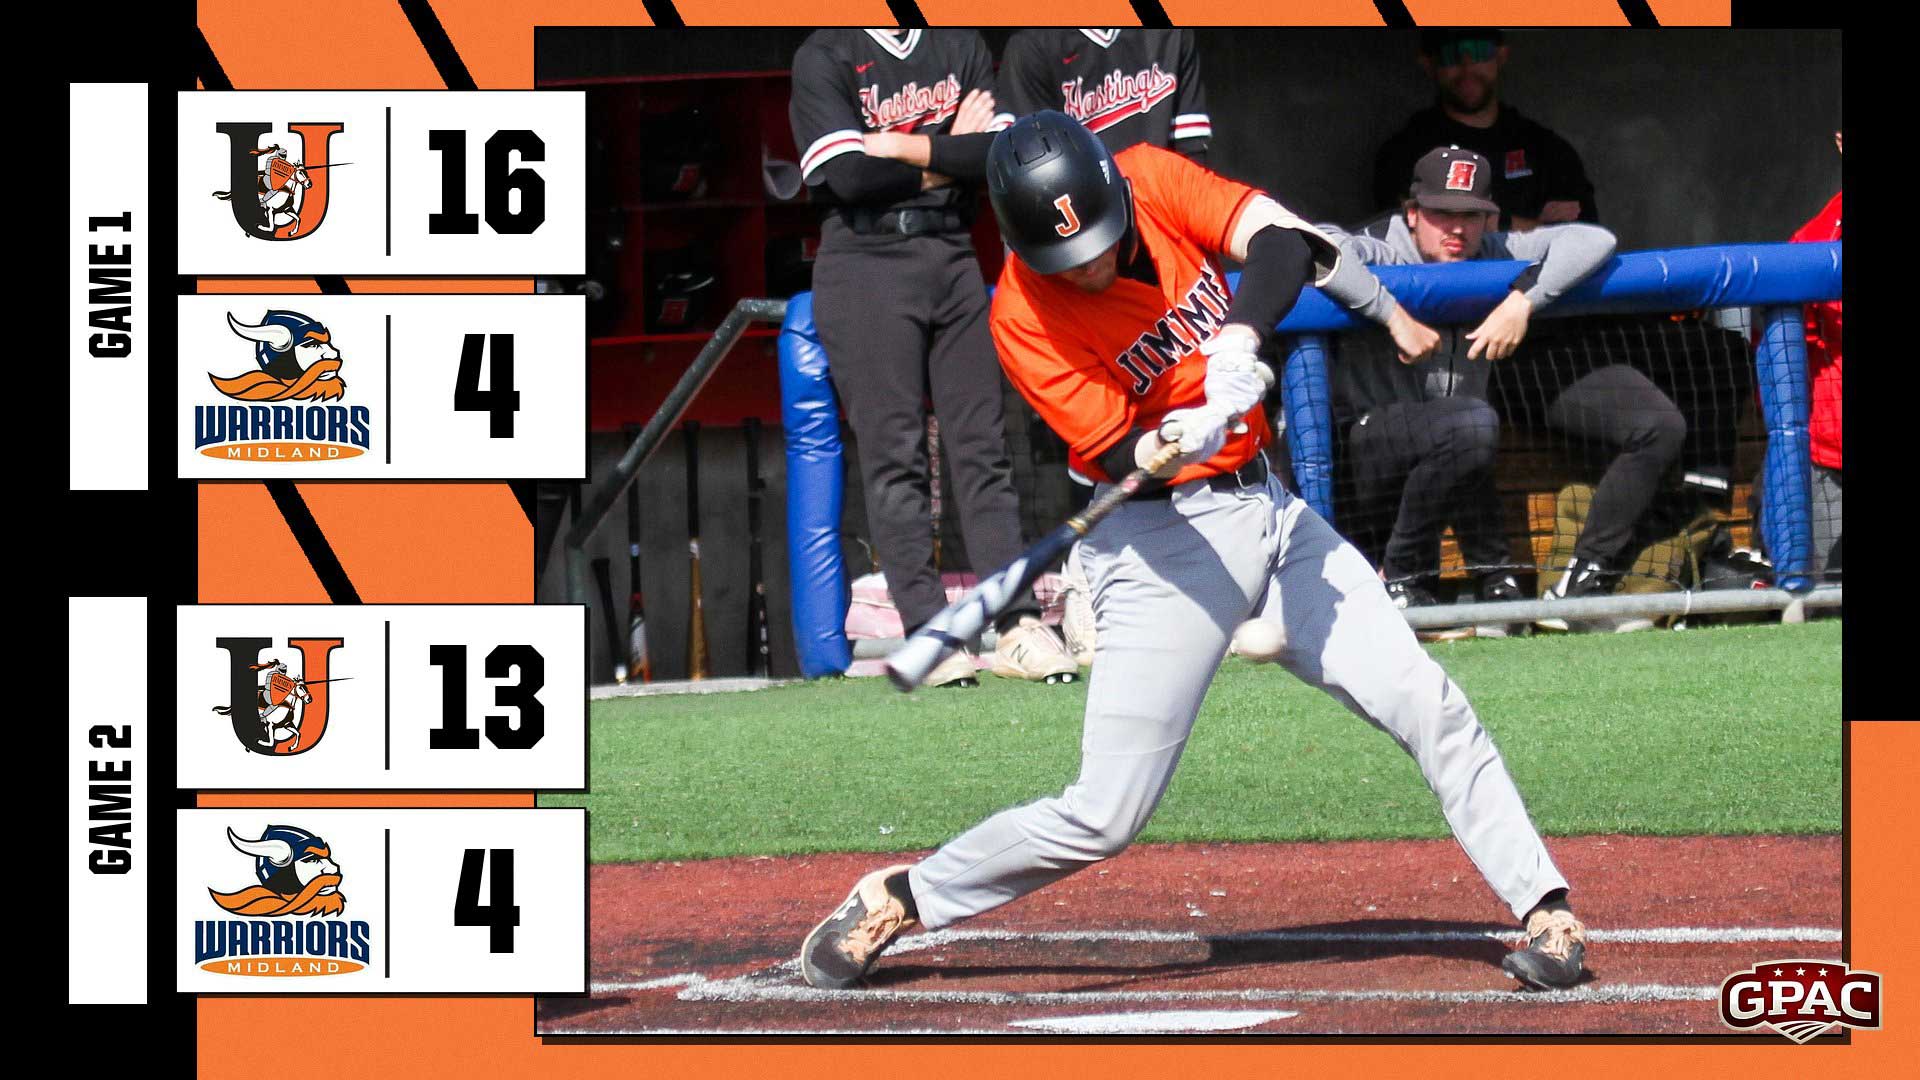 Jimmies win fourth straight with DH sweep of Warriors